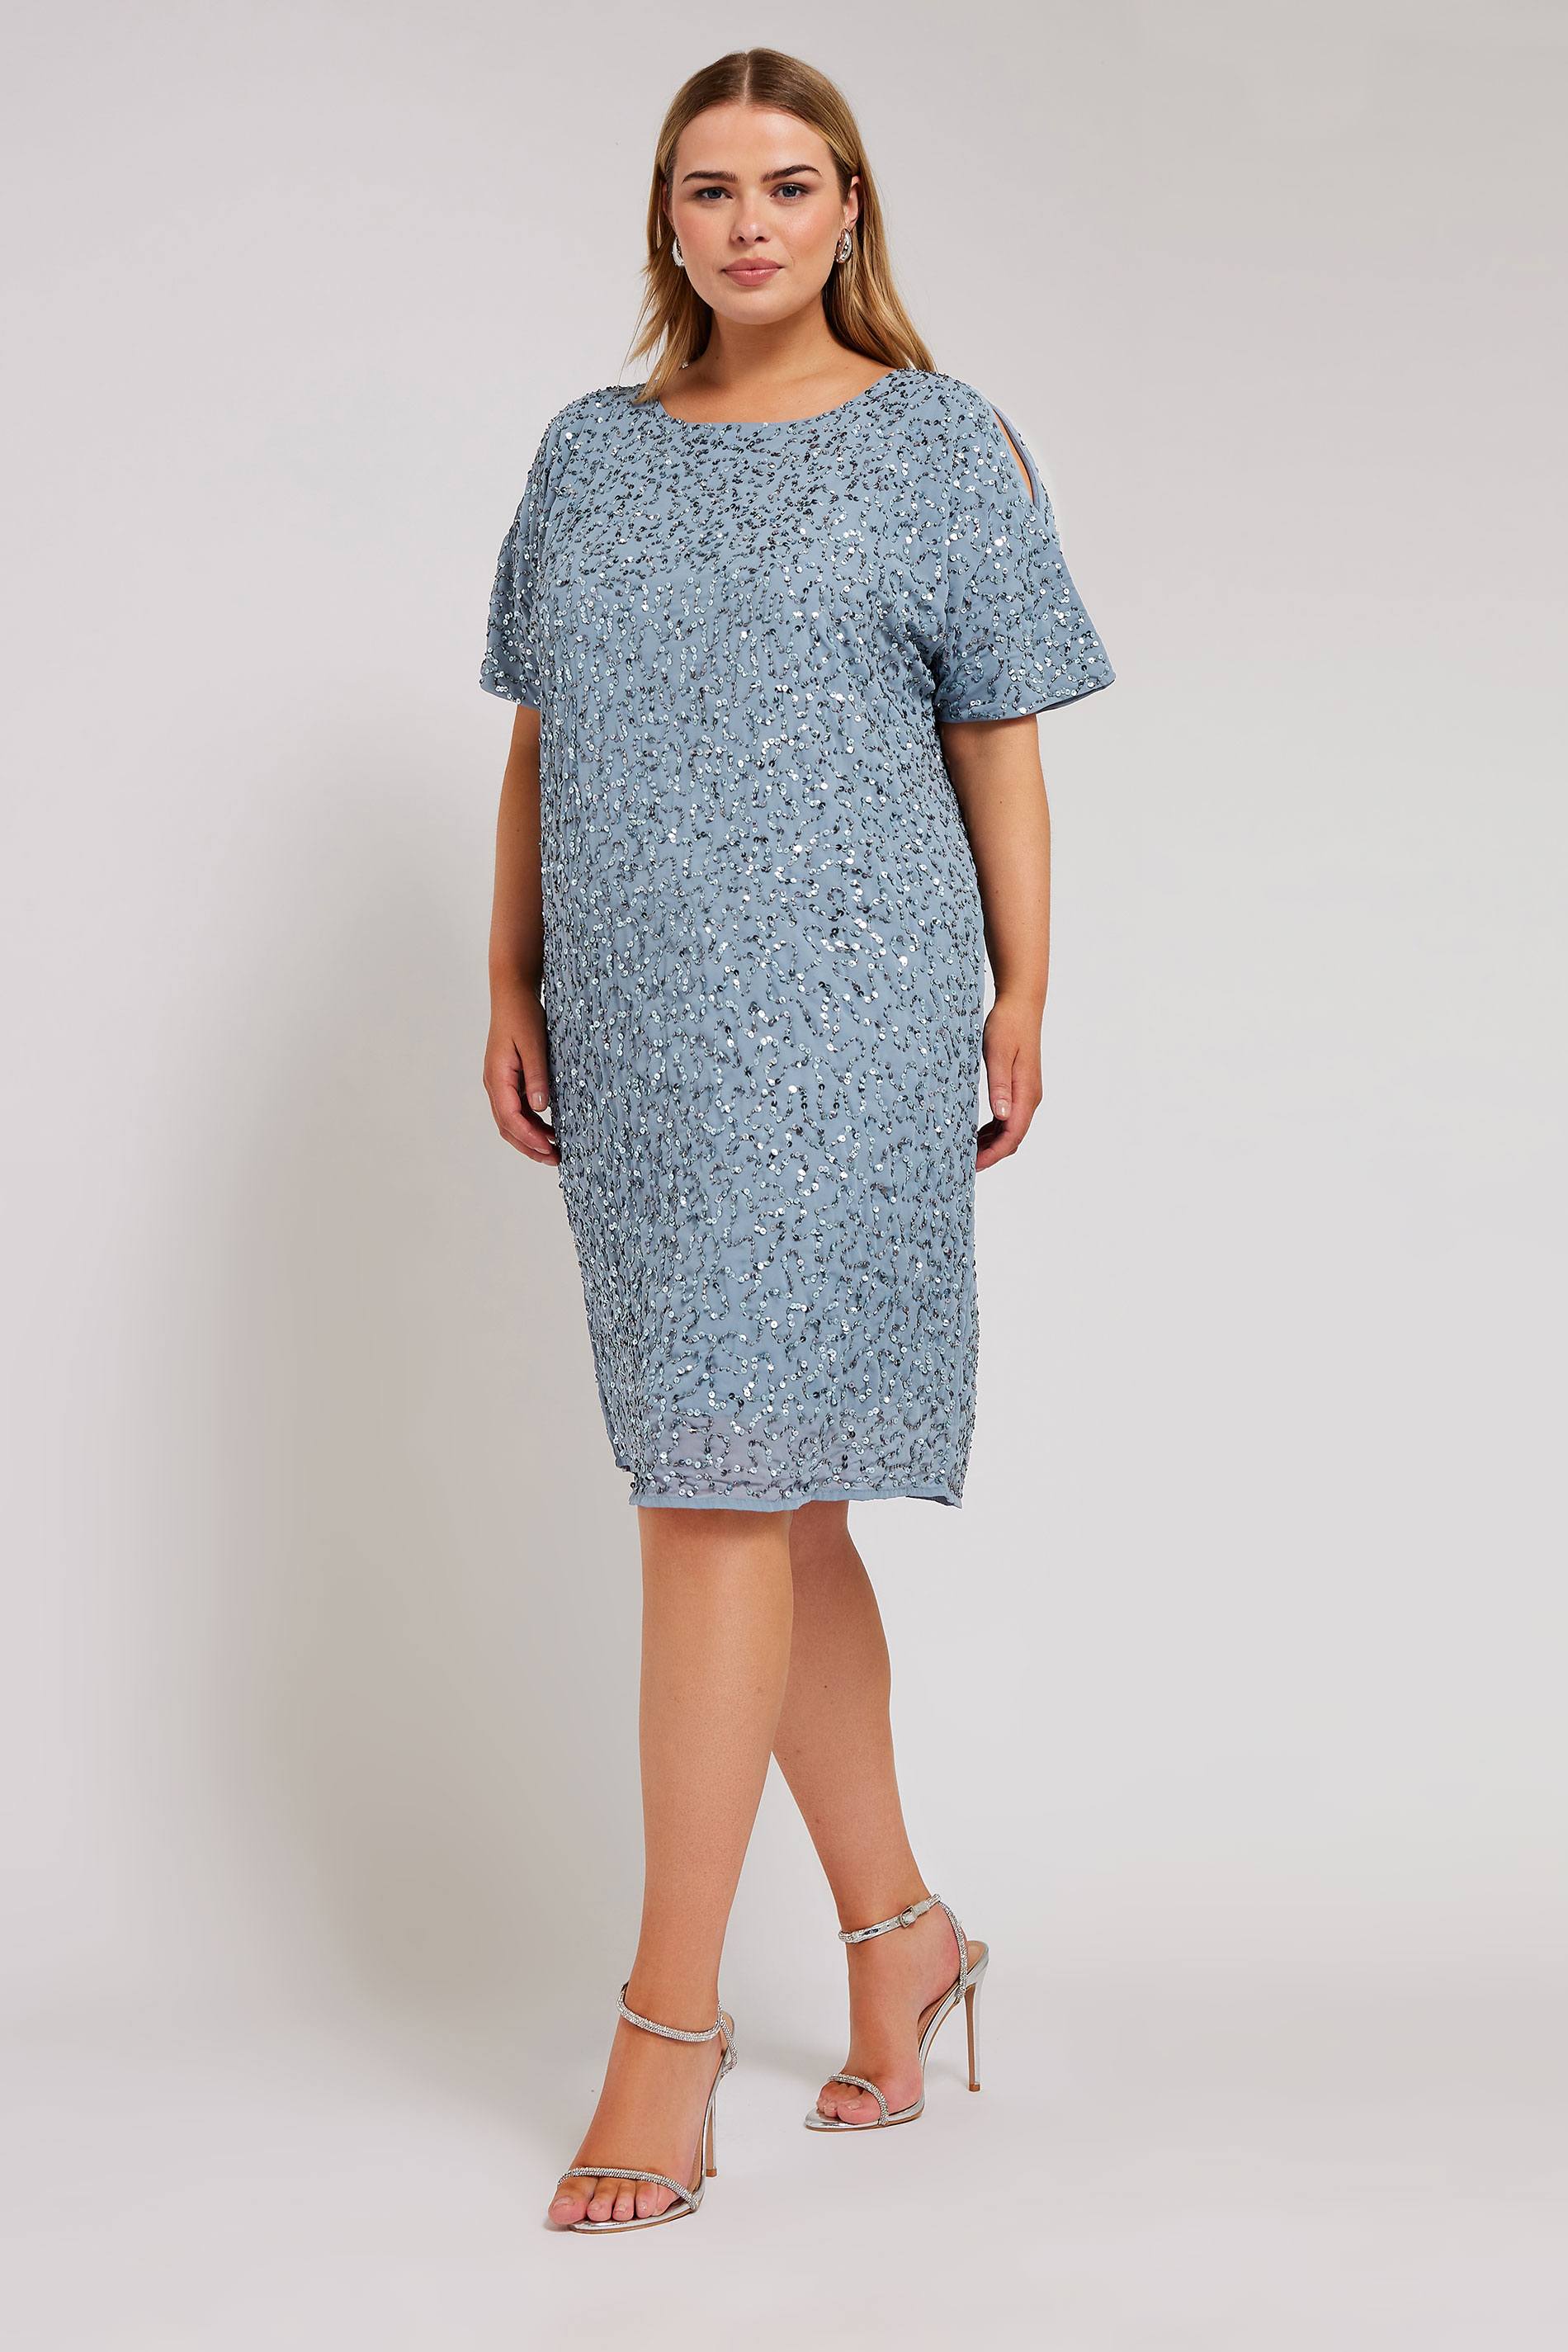 LUXE Plus Size Light Blue Sequin Hand Embellished Cape Dress | Yours Clothing 1